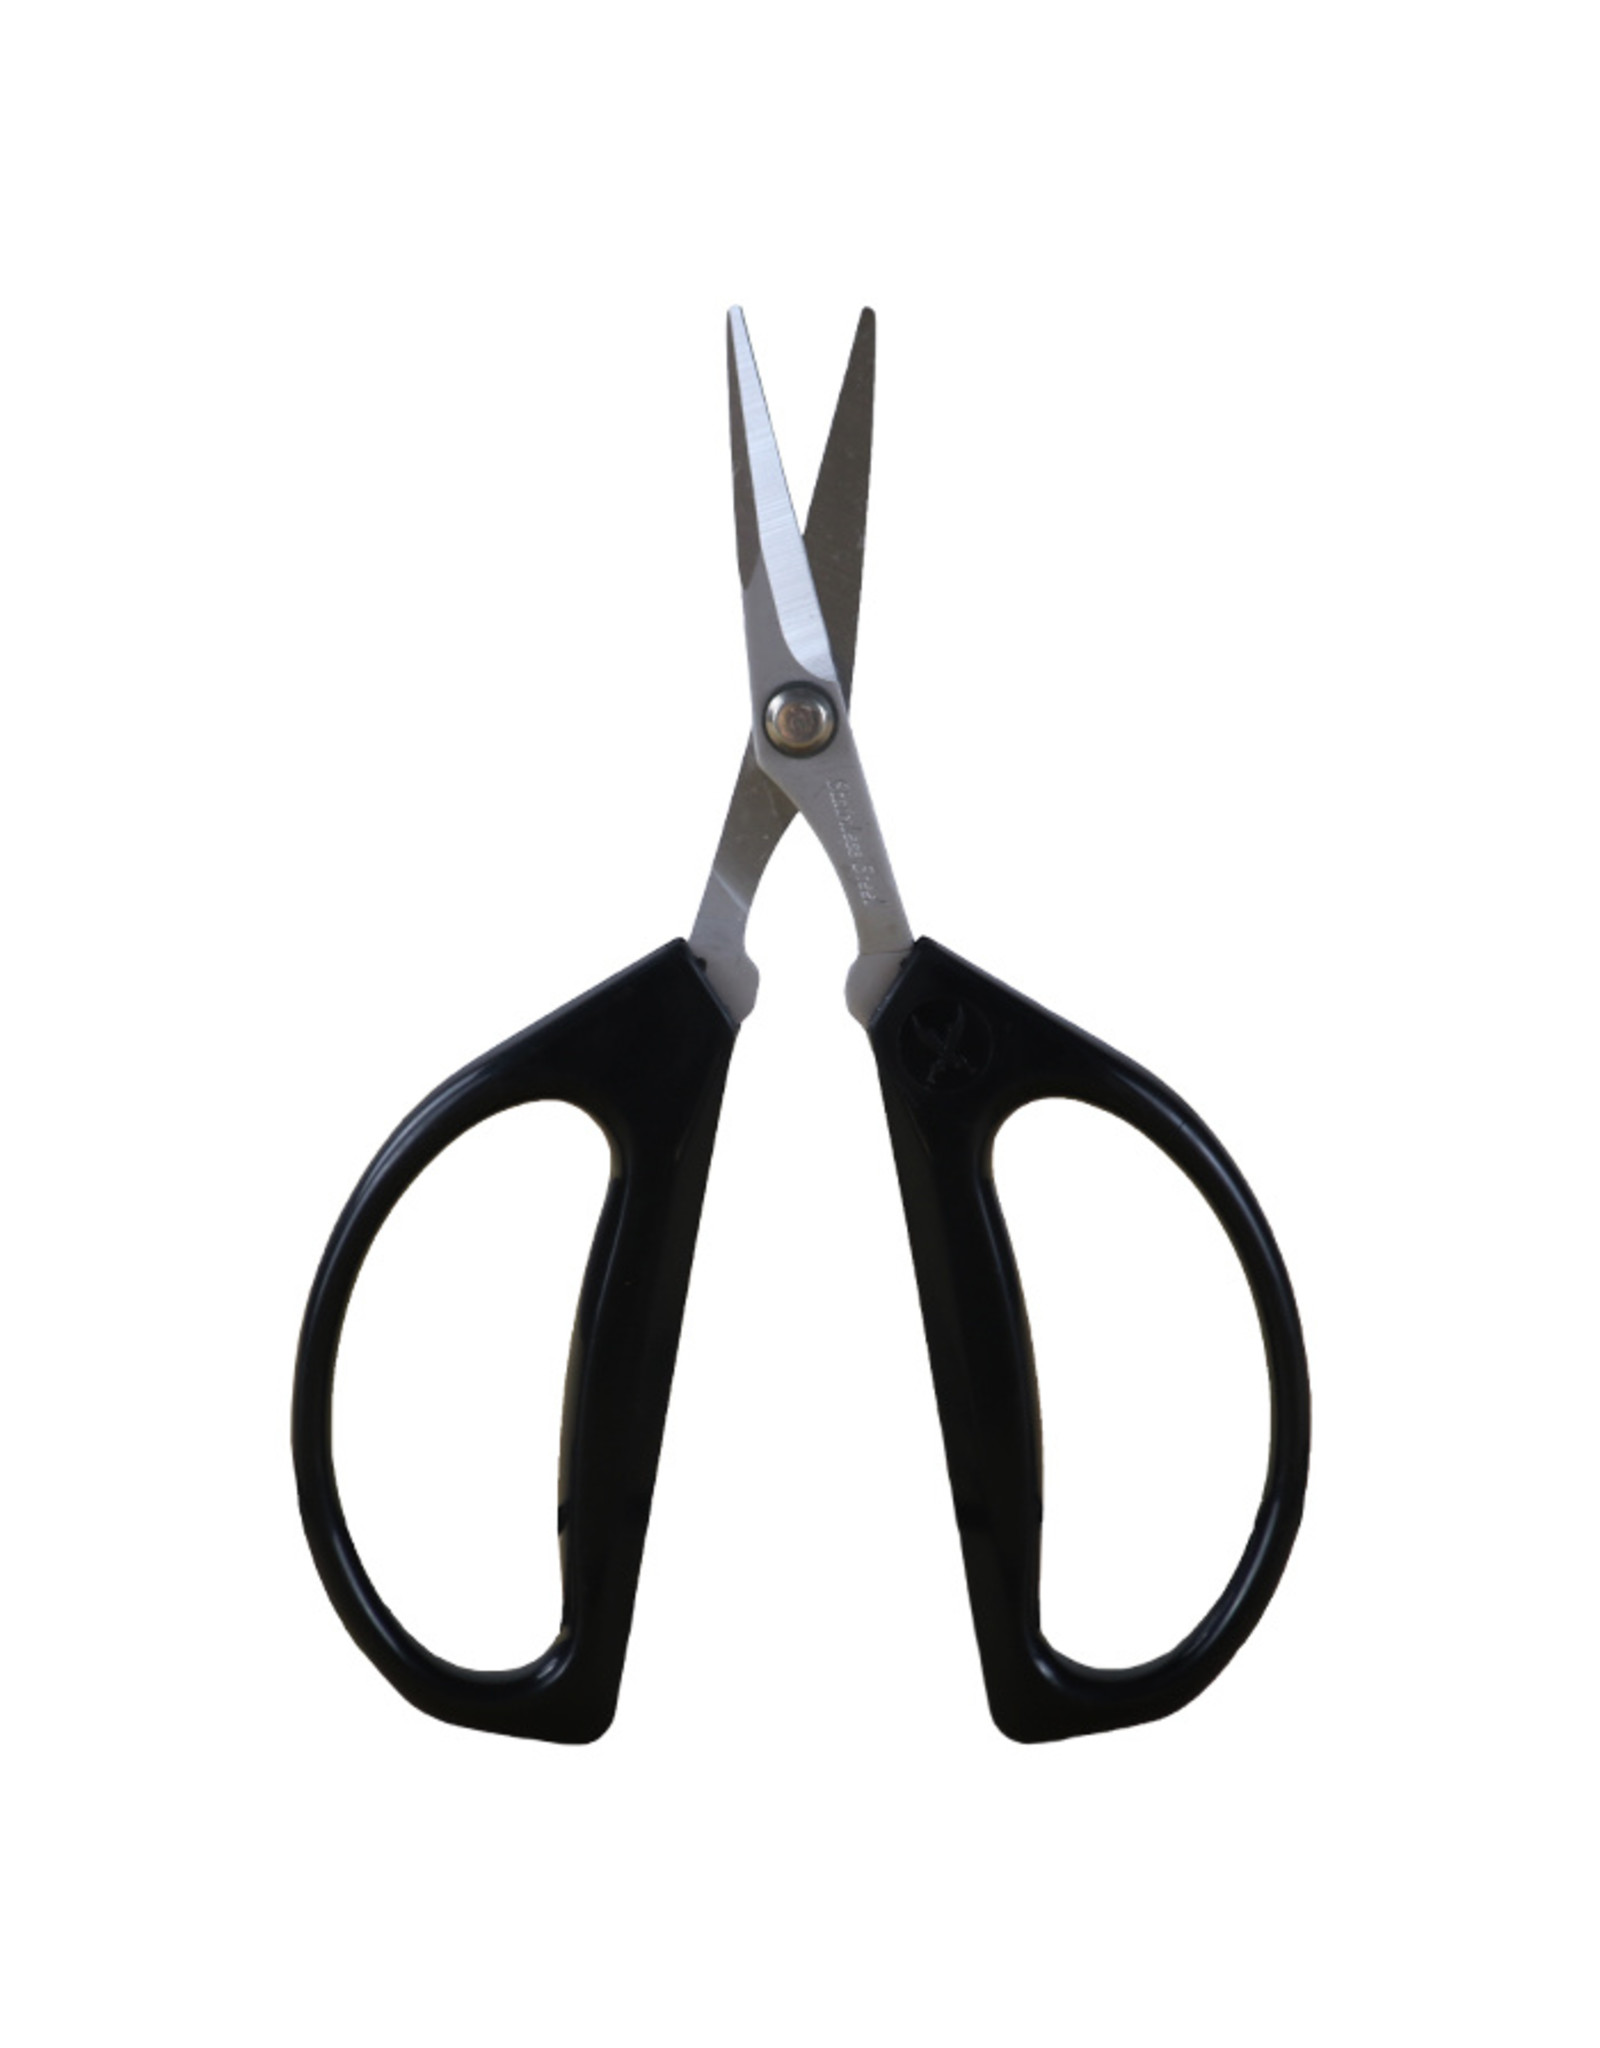 Piranha Pruner Bonsai Shear Scissors 40mm Stainless Blade - Brew & Grow  Hydroponics and Homebrewing Supplies of Chicagoland